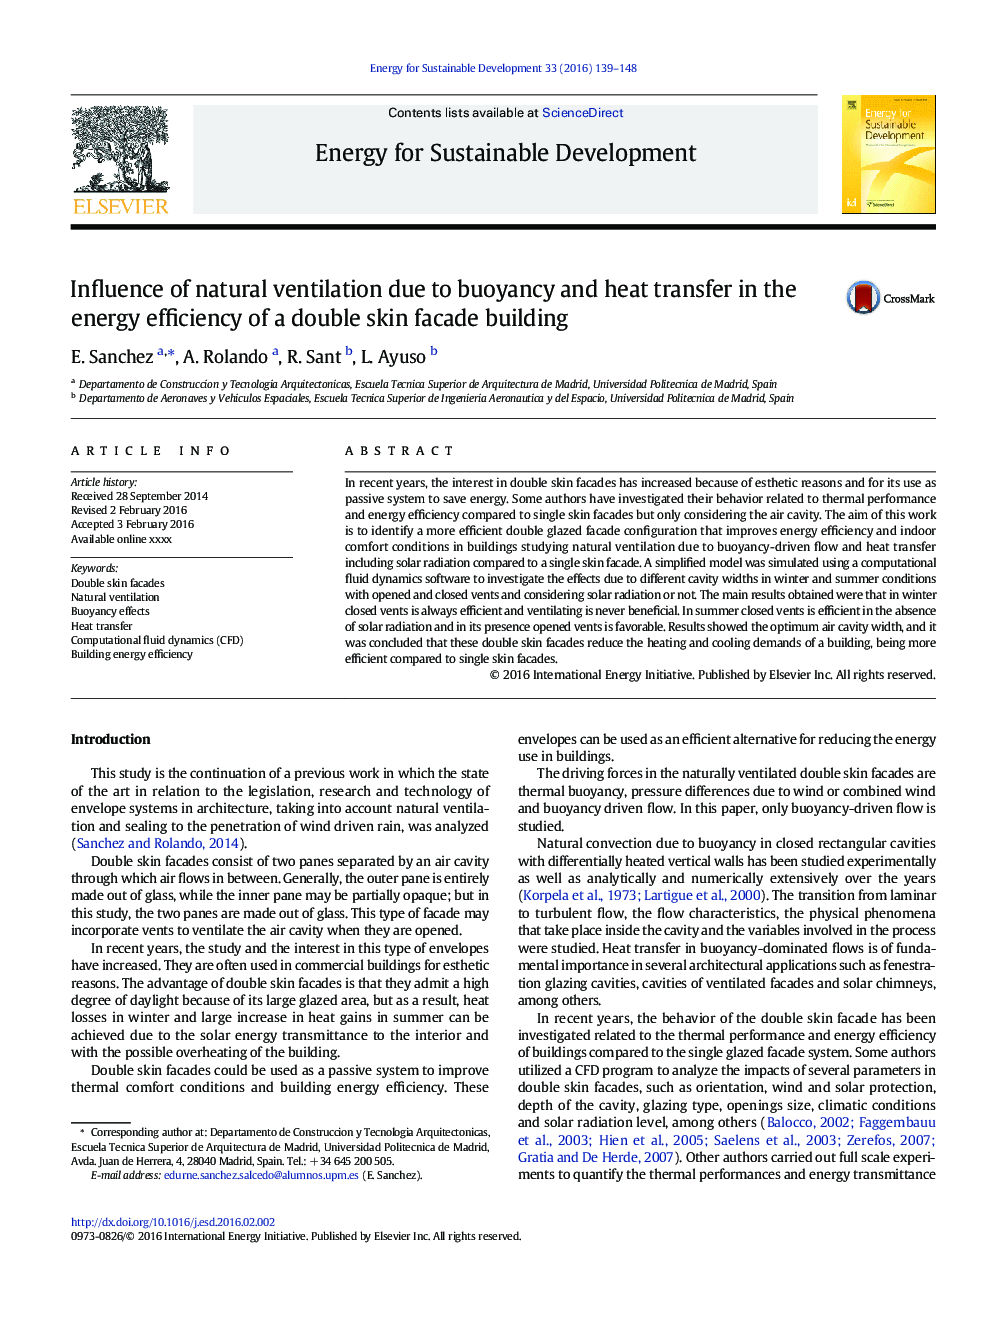 Influence of natural ventilation due to buoyancy and heat transfer in the energy efficiency of a double skin facade building